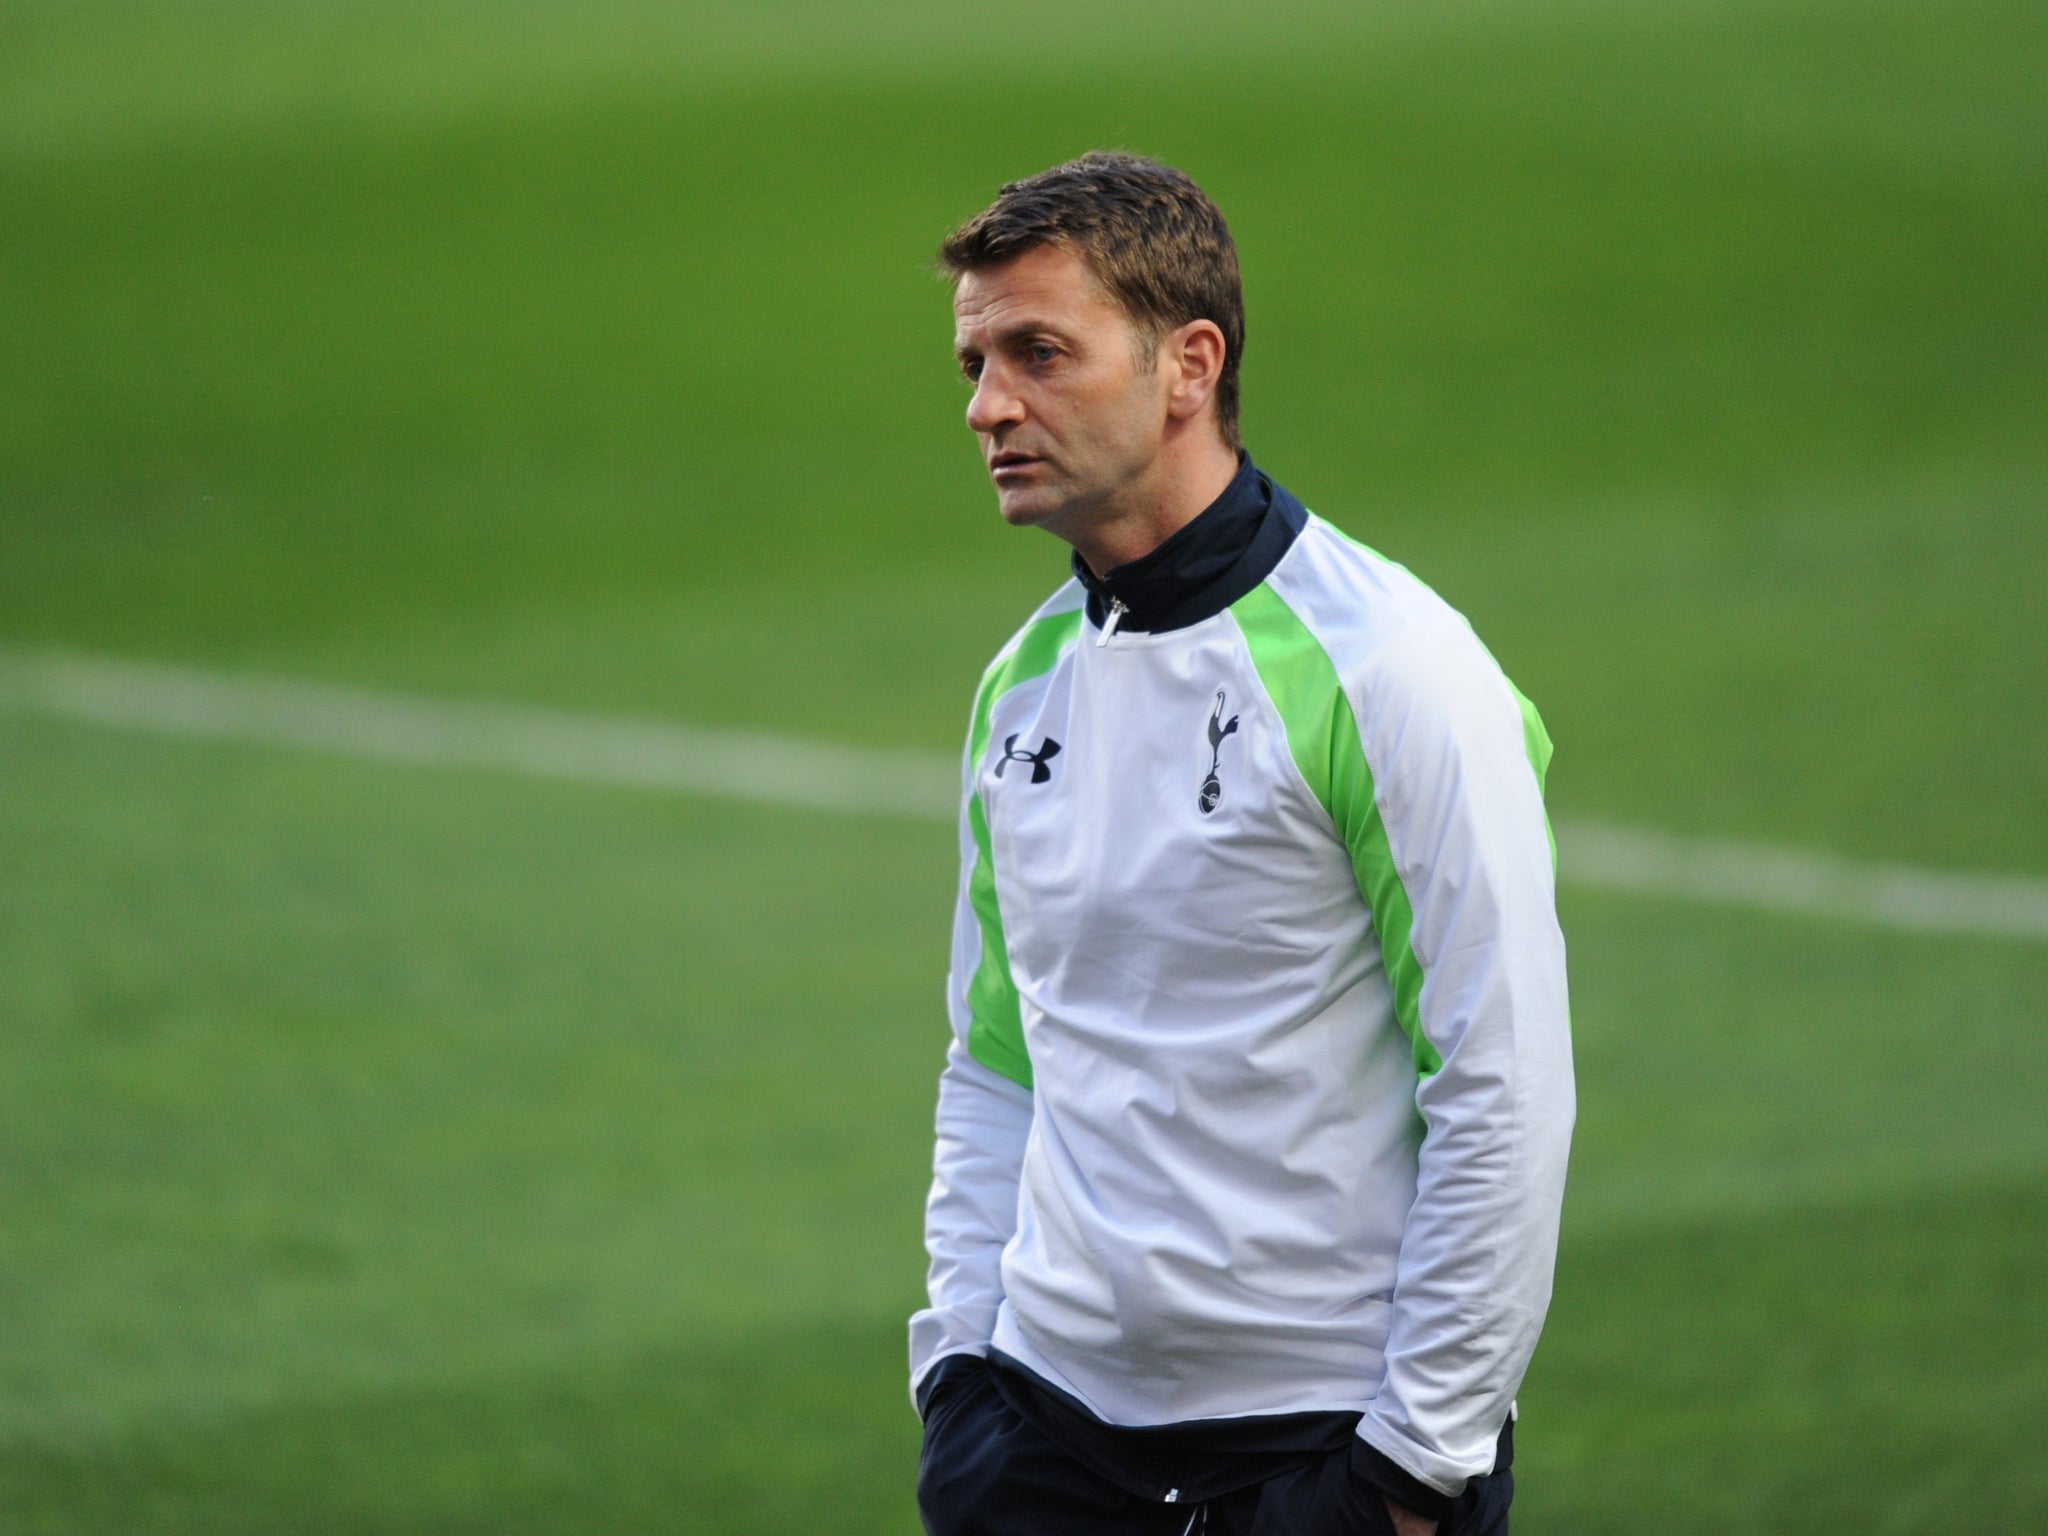 Tottenham manager Tim Sherwood praised his players for their valiant 2-2 draw in Benfica